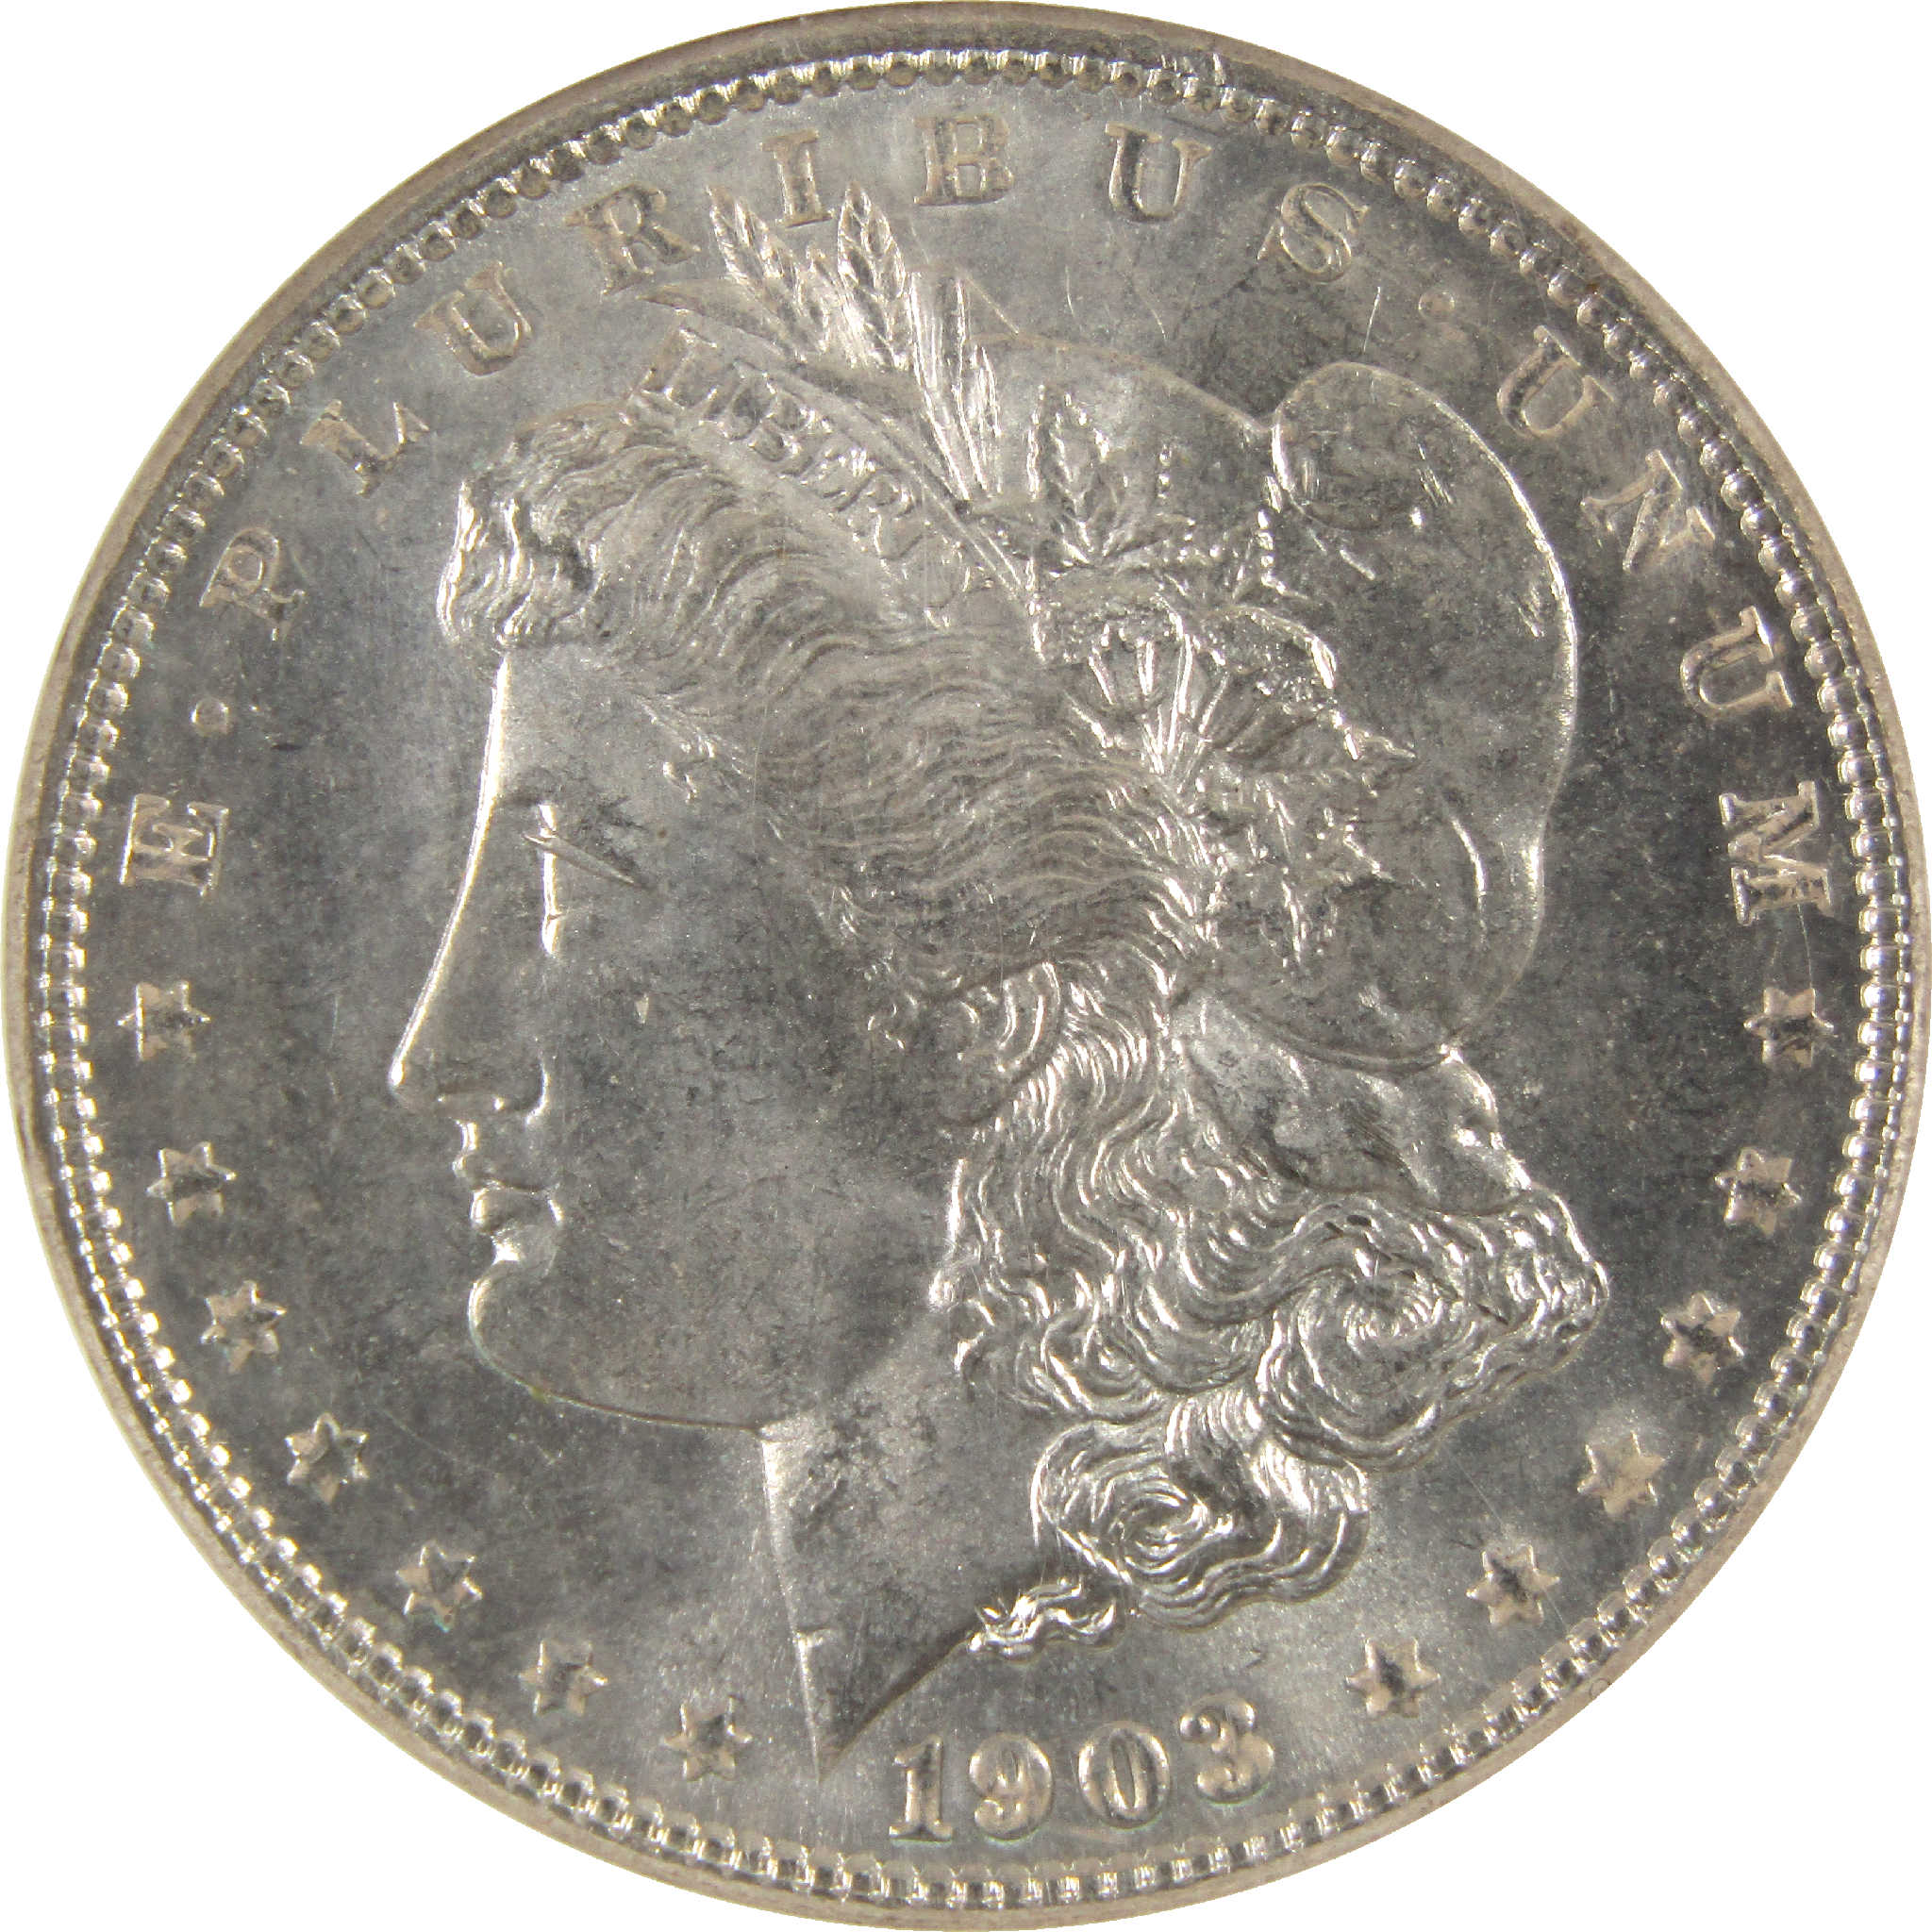 1903 Morgan Dollar MS 64 NGC Silver $1 Uncirculated Coin SKU:I11586 - Morgan coin - Morgan silver dollar - Morgan silver dollar for sale - Profile Coins &amp; Collectibles